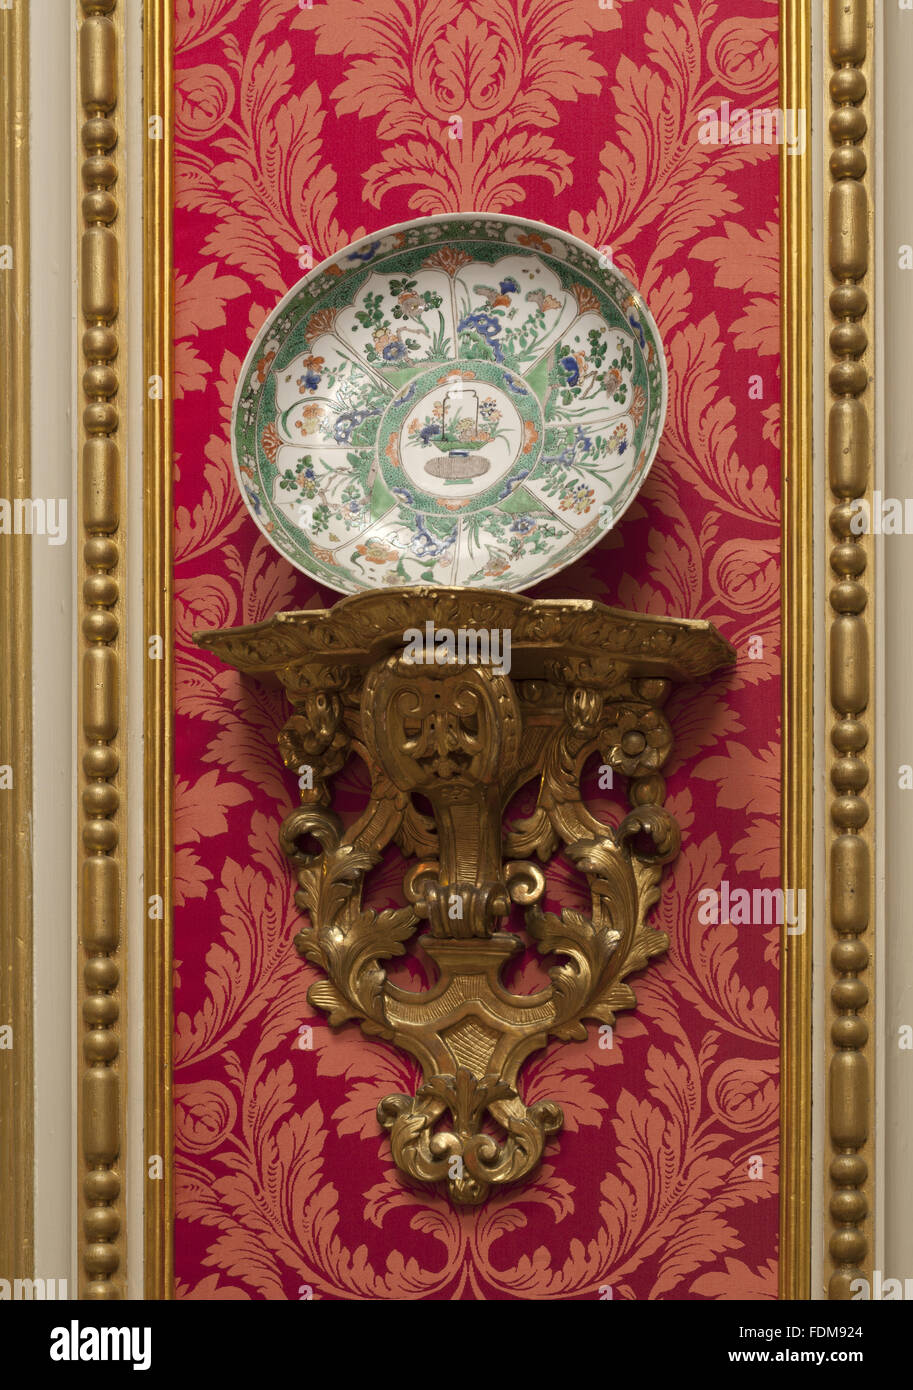 One of a pair of famille verte dishes on a giltwood wall bracket in the Red Drawing Room at Belton House, Lincolnshire. National Trust Inventory number: 433401. Stock Photo